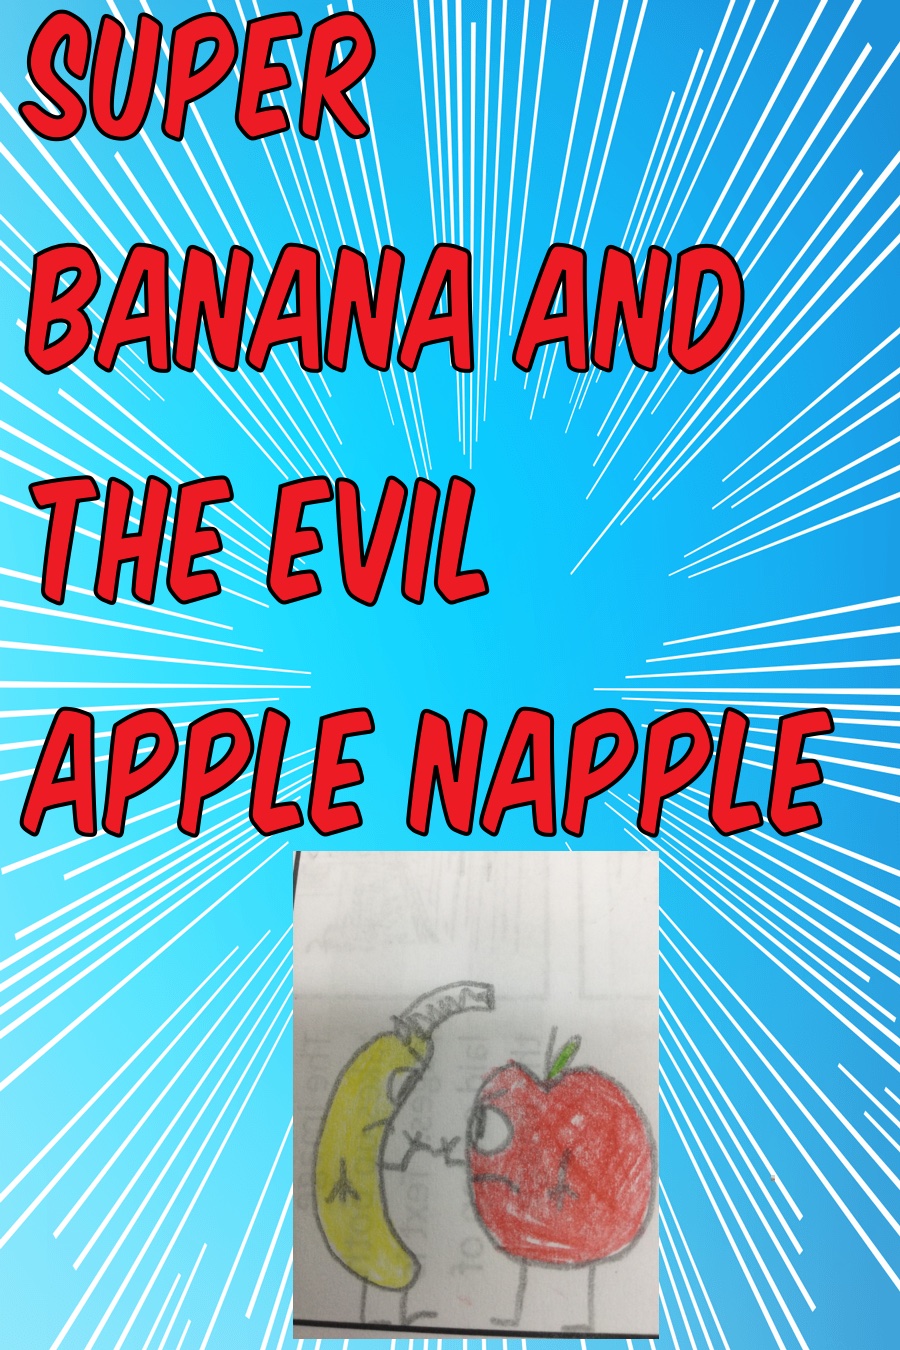 Super Banana and the Evil Apple Napple by Elise Z